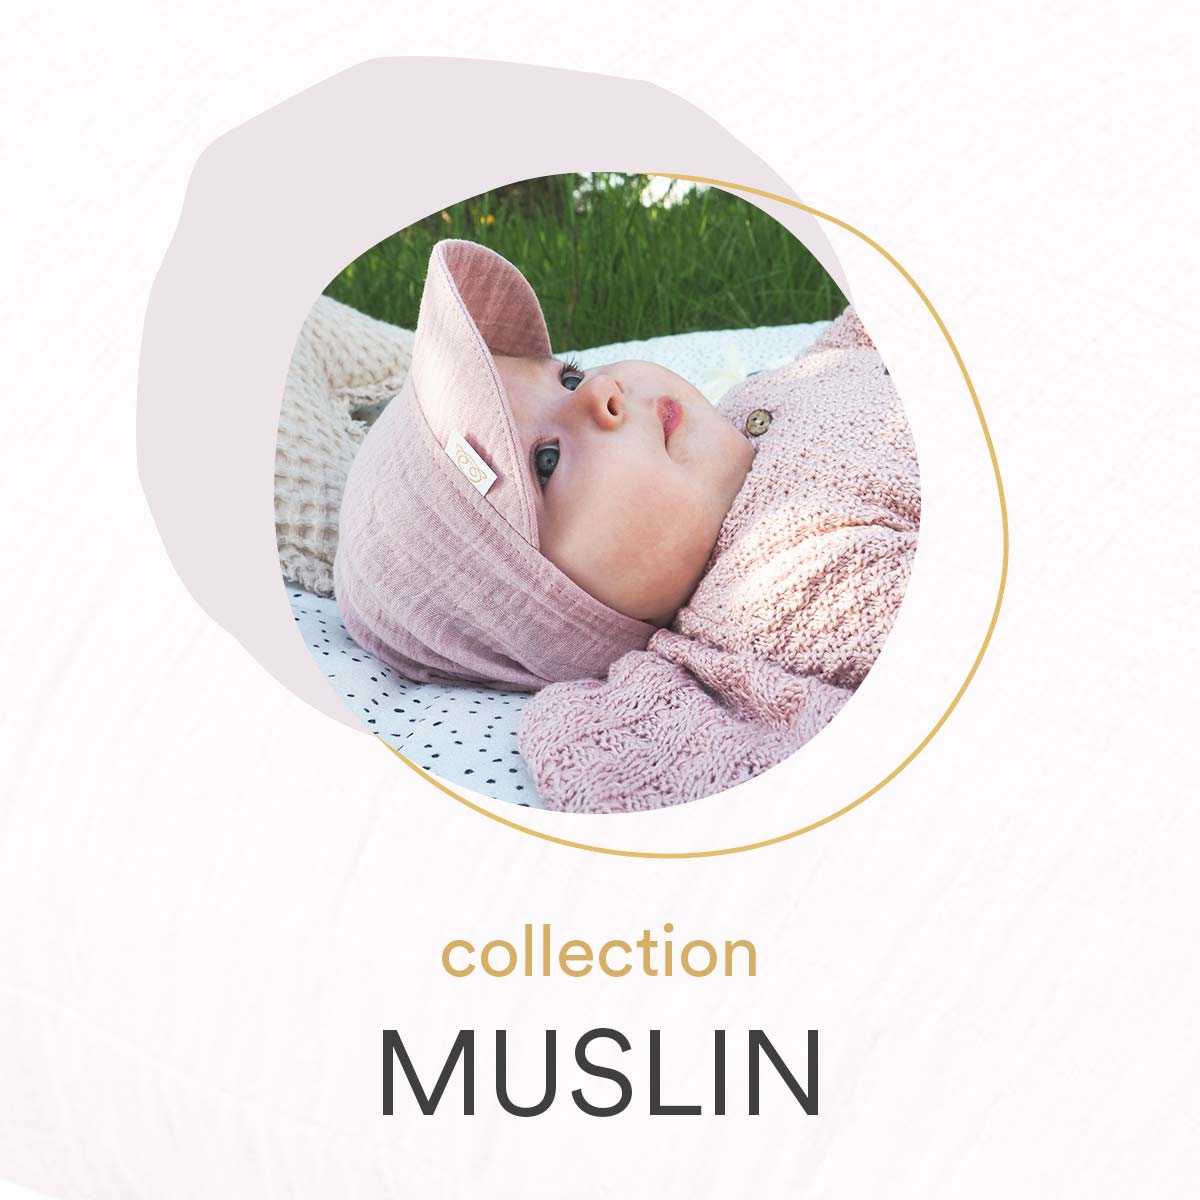 Muslin collection